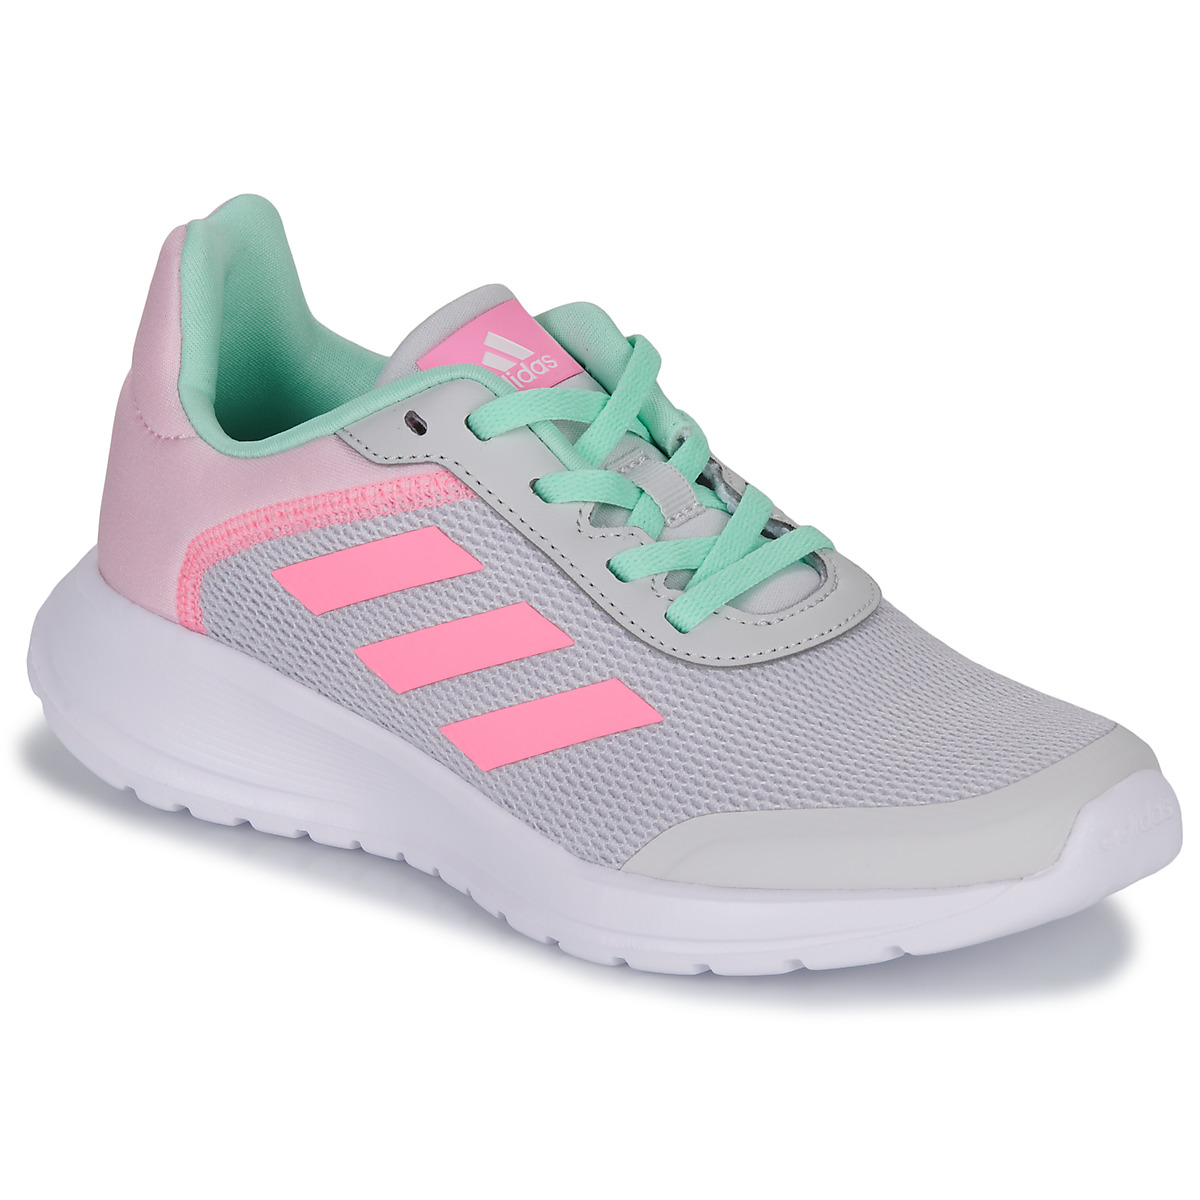 Europe Shoes Running-shoes Fast Tensaur 2.0 - - / Child € Sportswear Spartoo Run delivery | 35,20 ! K Adidas Pink Green